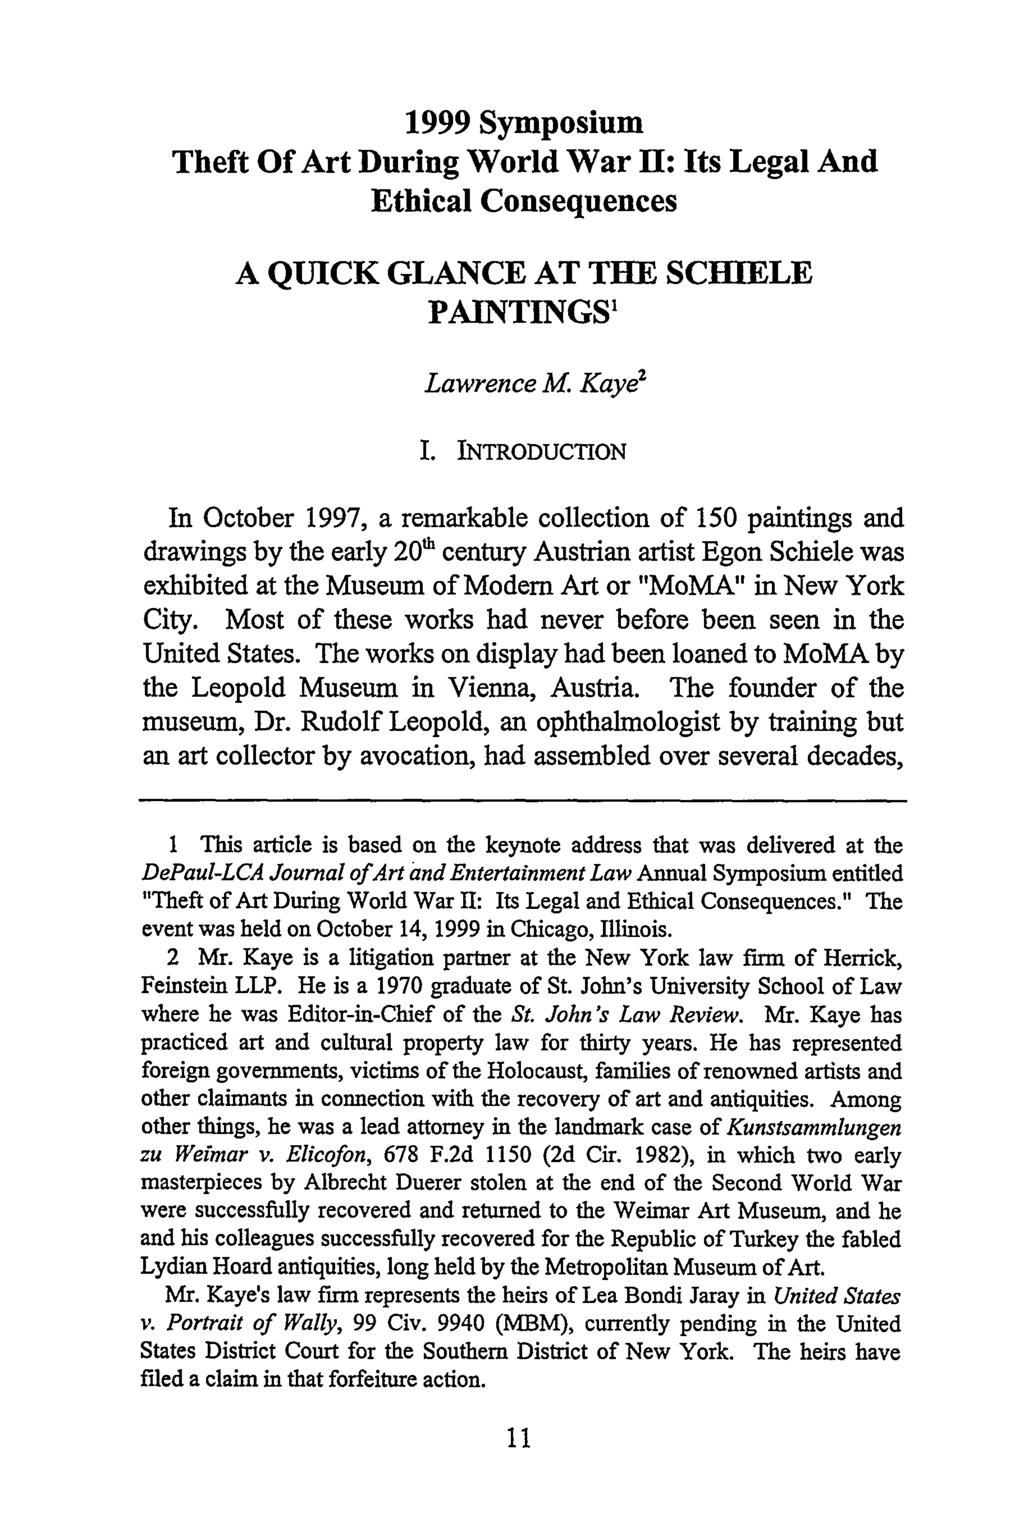 Kaye: A Quick Glance at the Schiele Paintings 1999 Symposium Theft Of Art During World War H: Its Legal And Ethical Consequences A QUICK GLANCE AT THE SCHIELE PAINTINGS 1 Lawrence M Kaye 2 1.